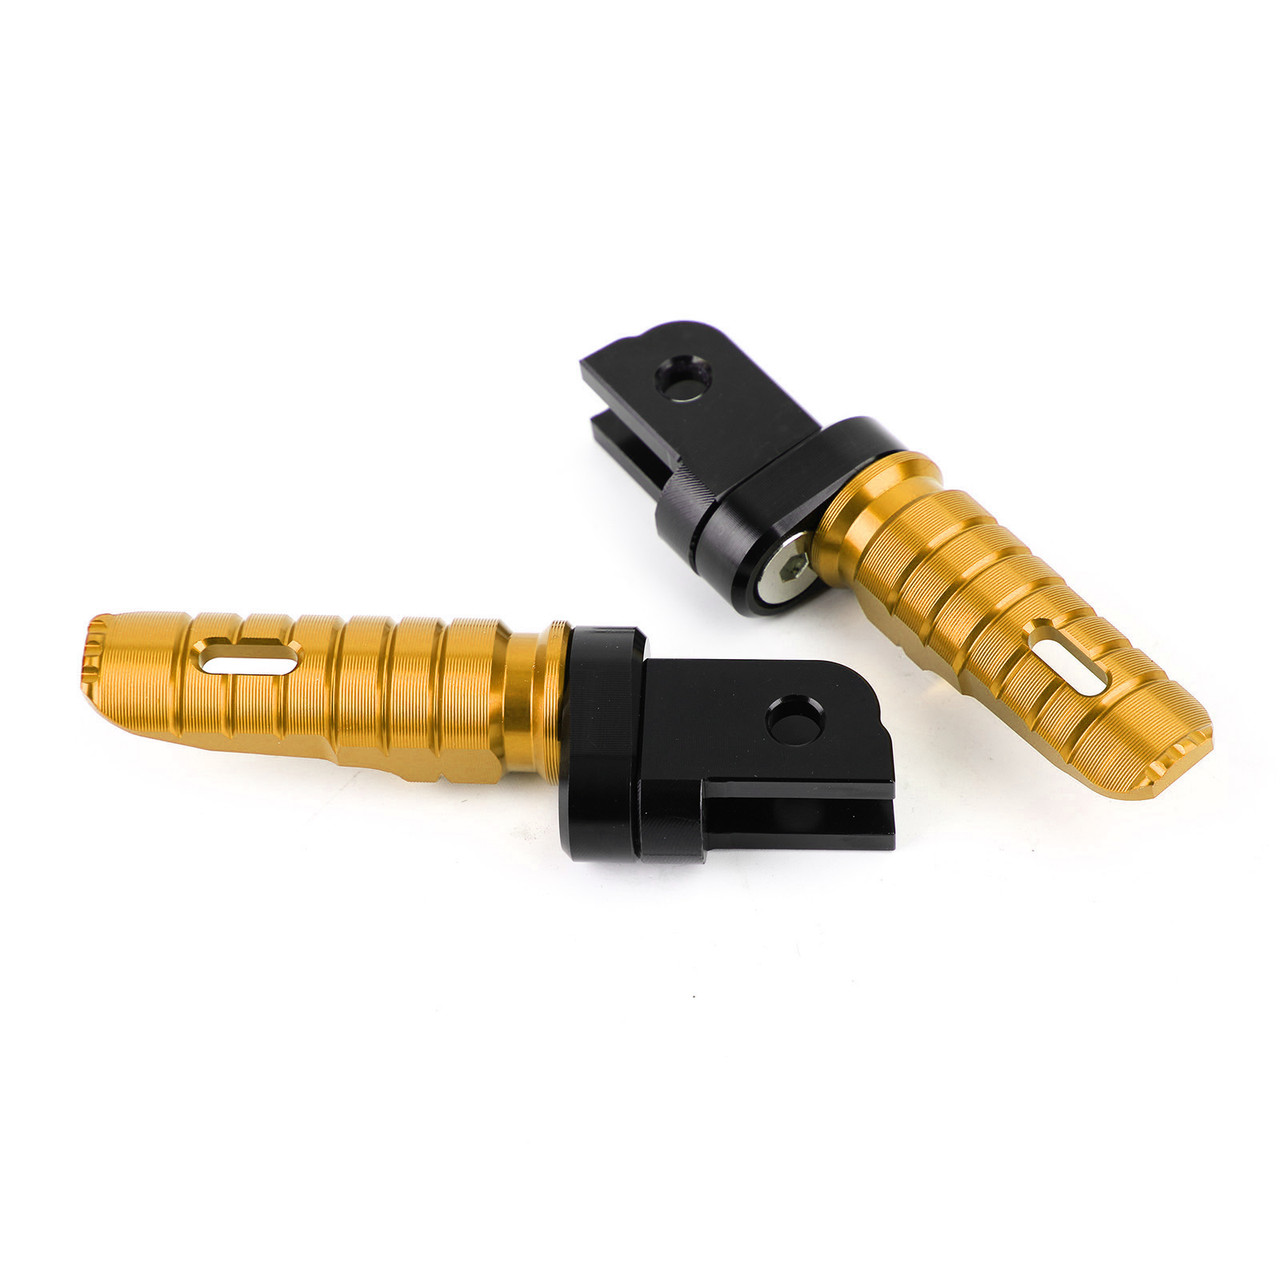 Front Footpegs Fits For BMW R nineT 14-20 BMW R nineT Scrambler 16-20 BMW R nineT Pure 16-20 BMW F900R 19-21 BMW F900XR 19-21 Gold